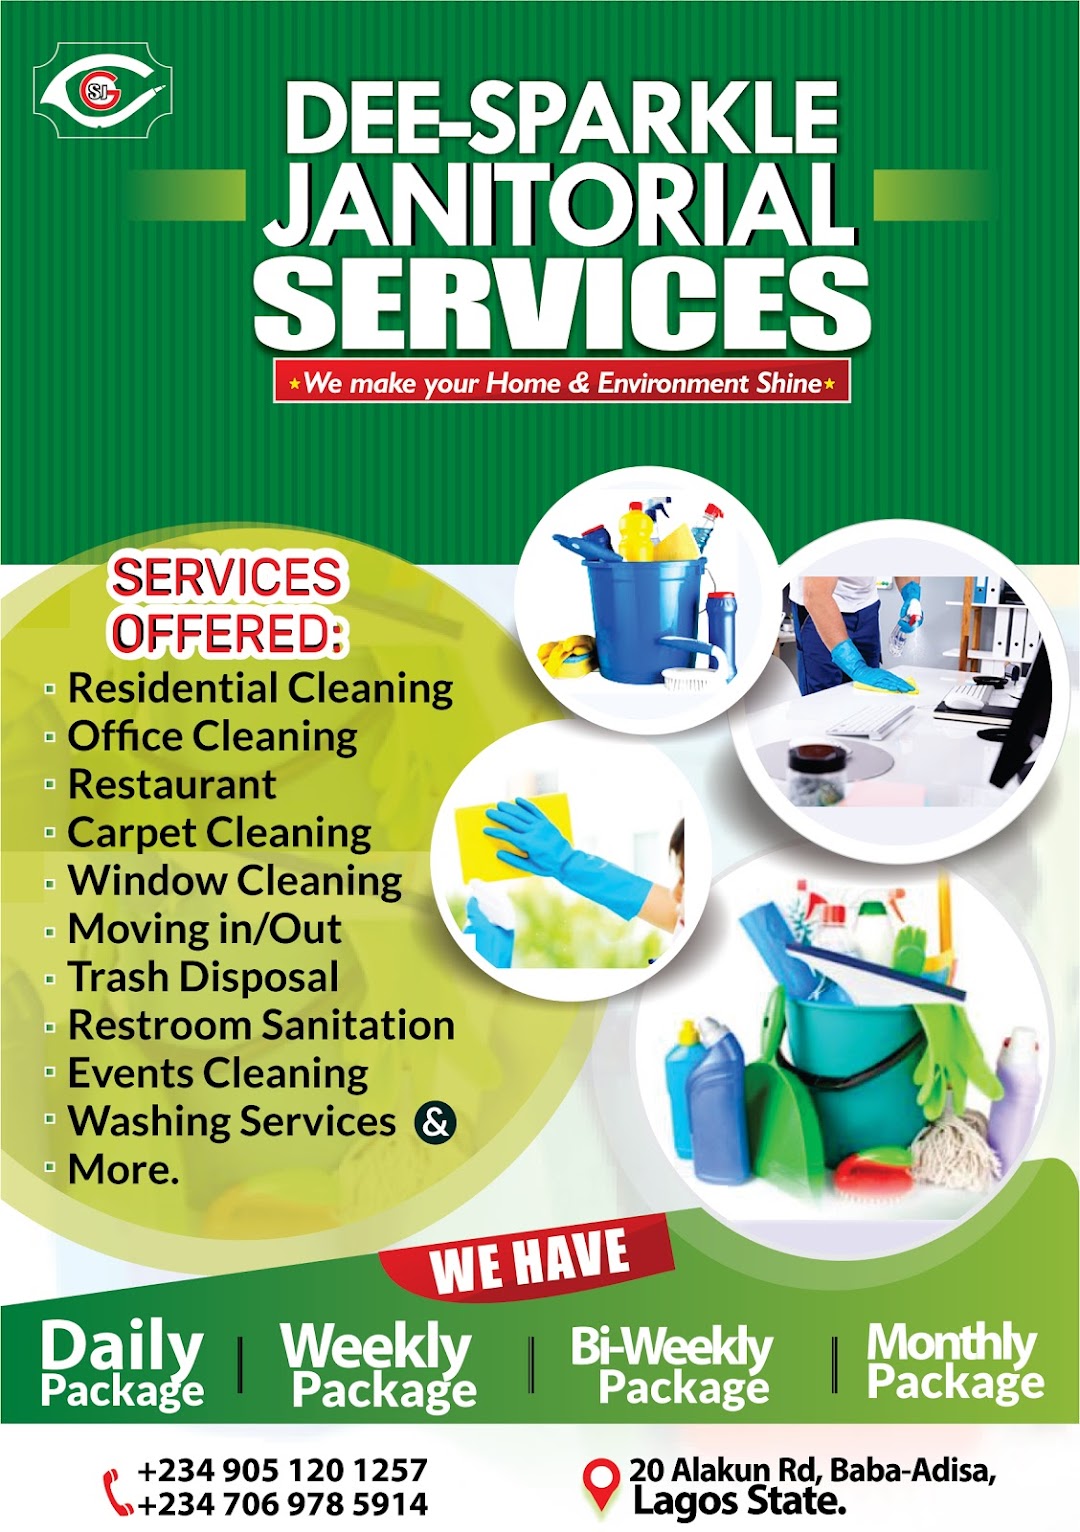 Dee-sparkle janitorial services